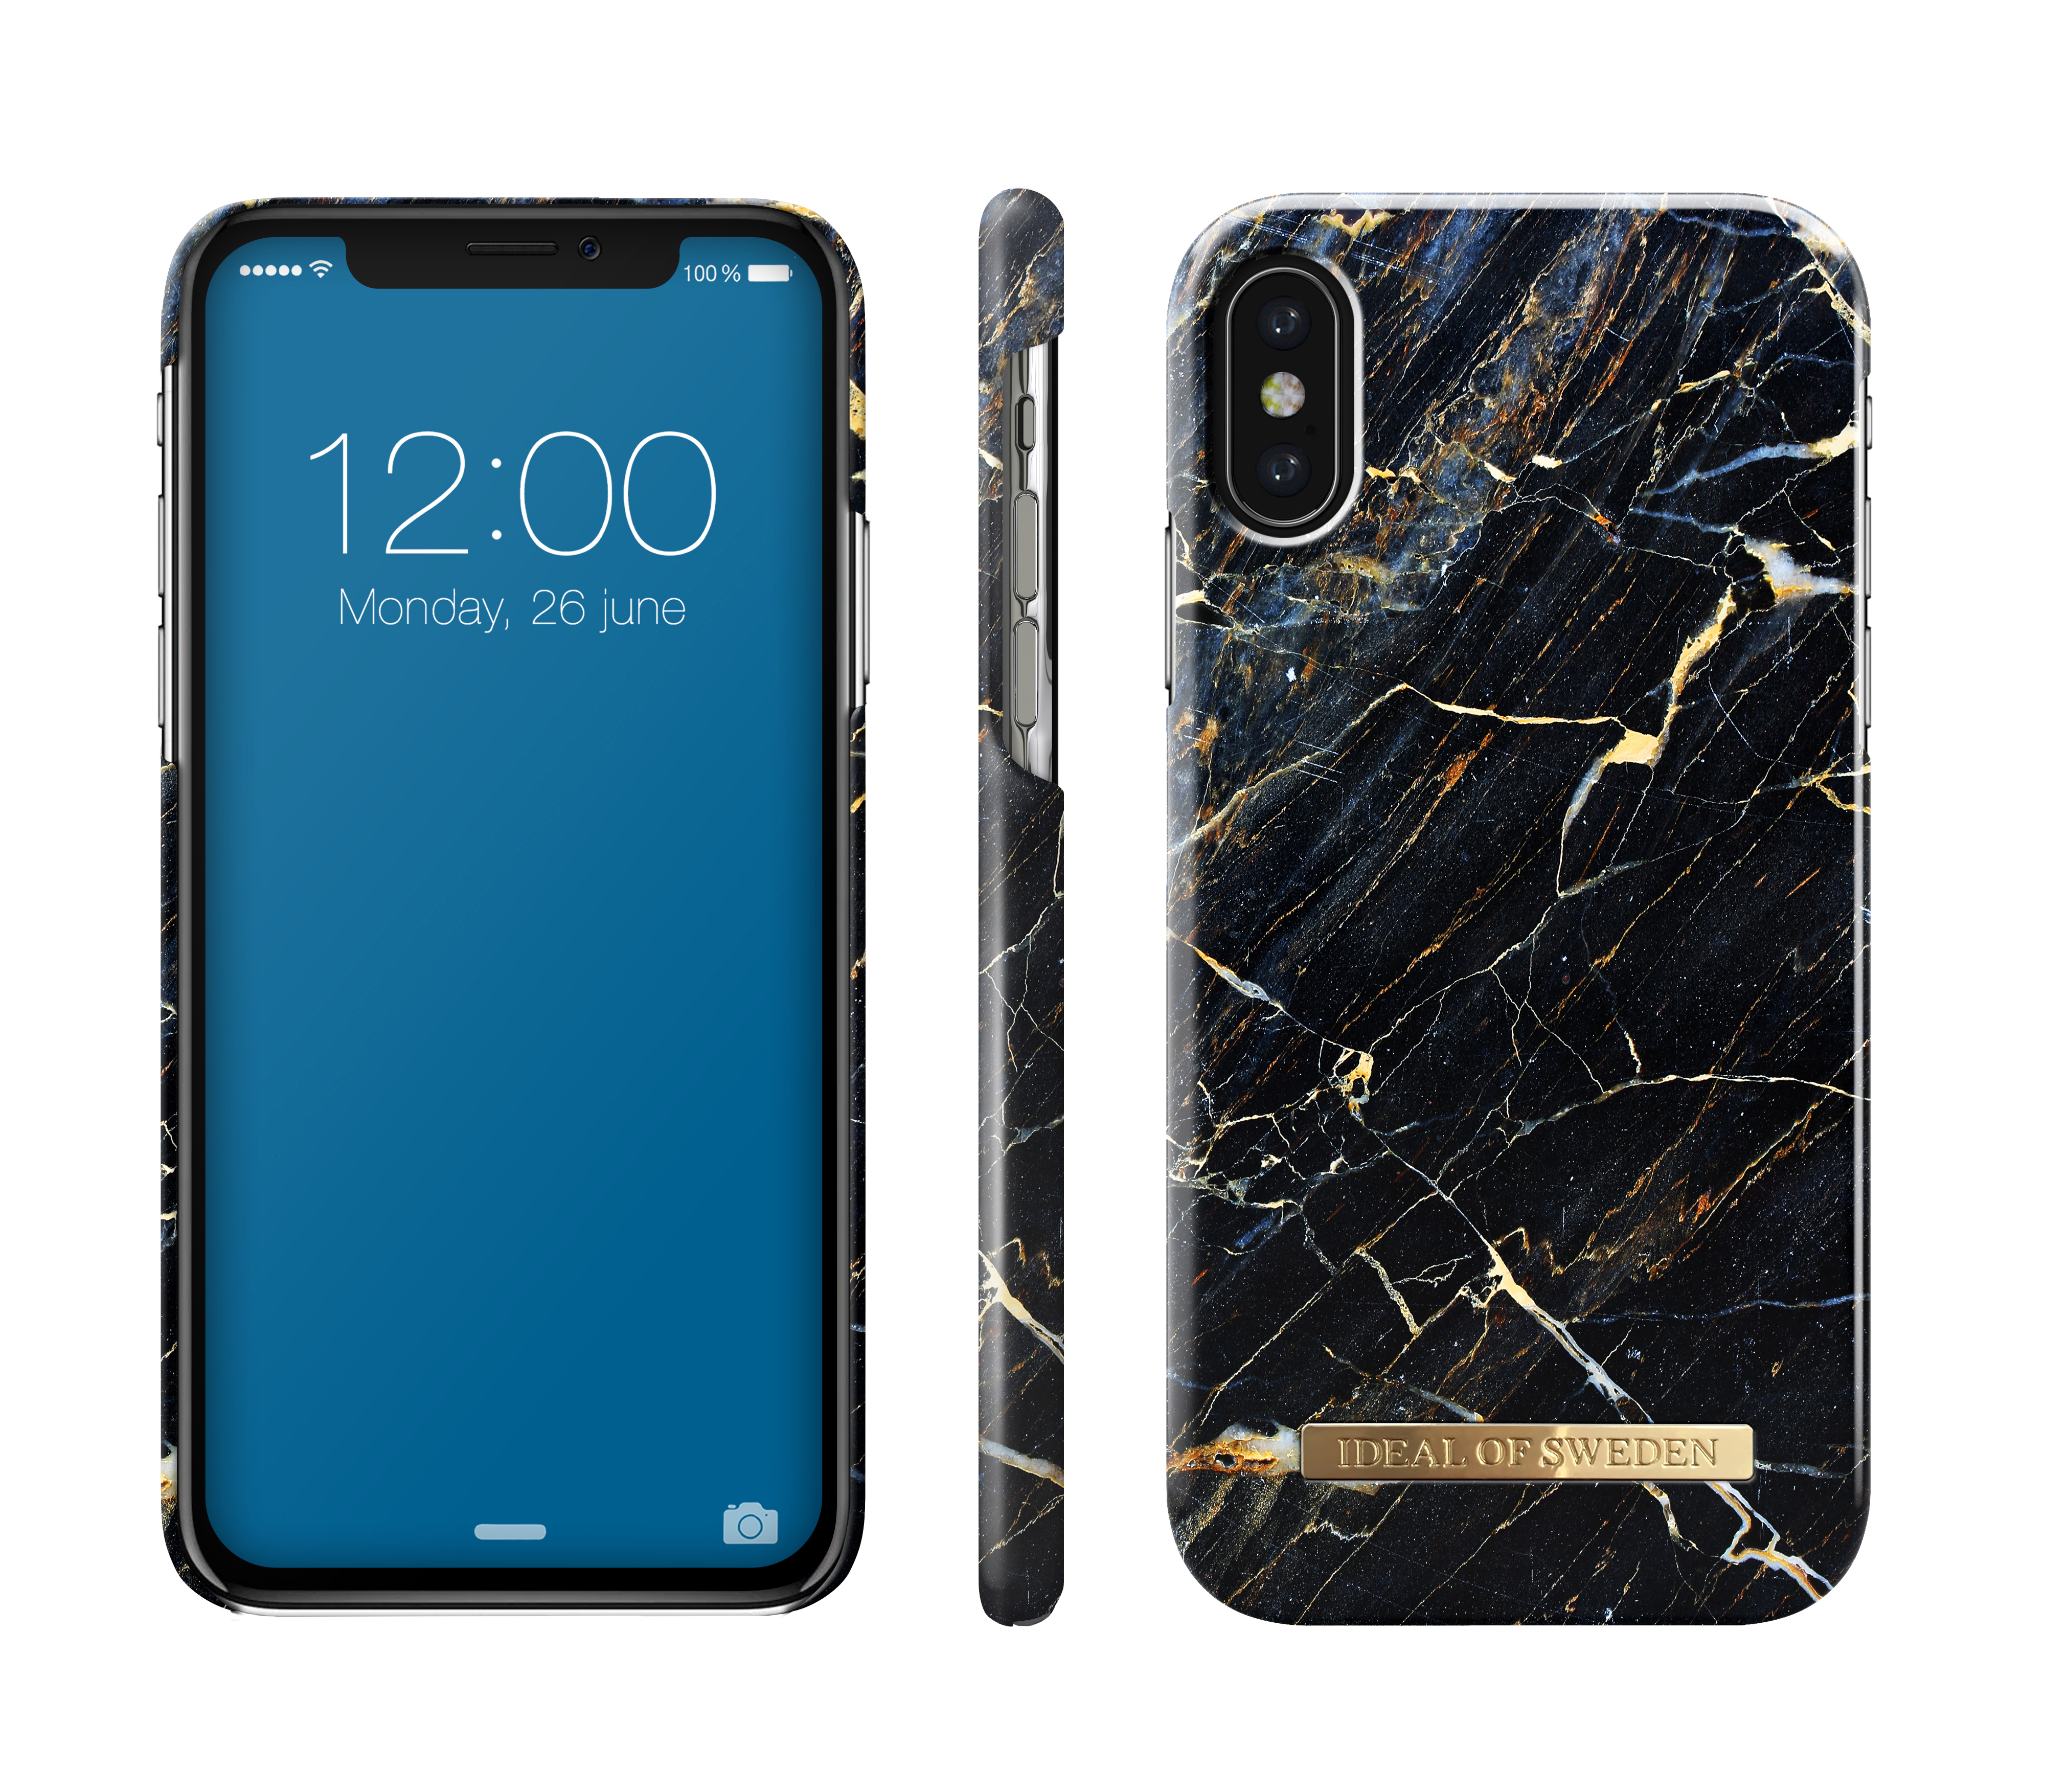 iPhone Backcover, - IDEAL Port MARBLE, CASE IP Laurent XS IDFCA16-IXS-49 X, OF SWEDEN XS, Marble iPhone FASHION Apple, - X